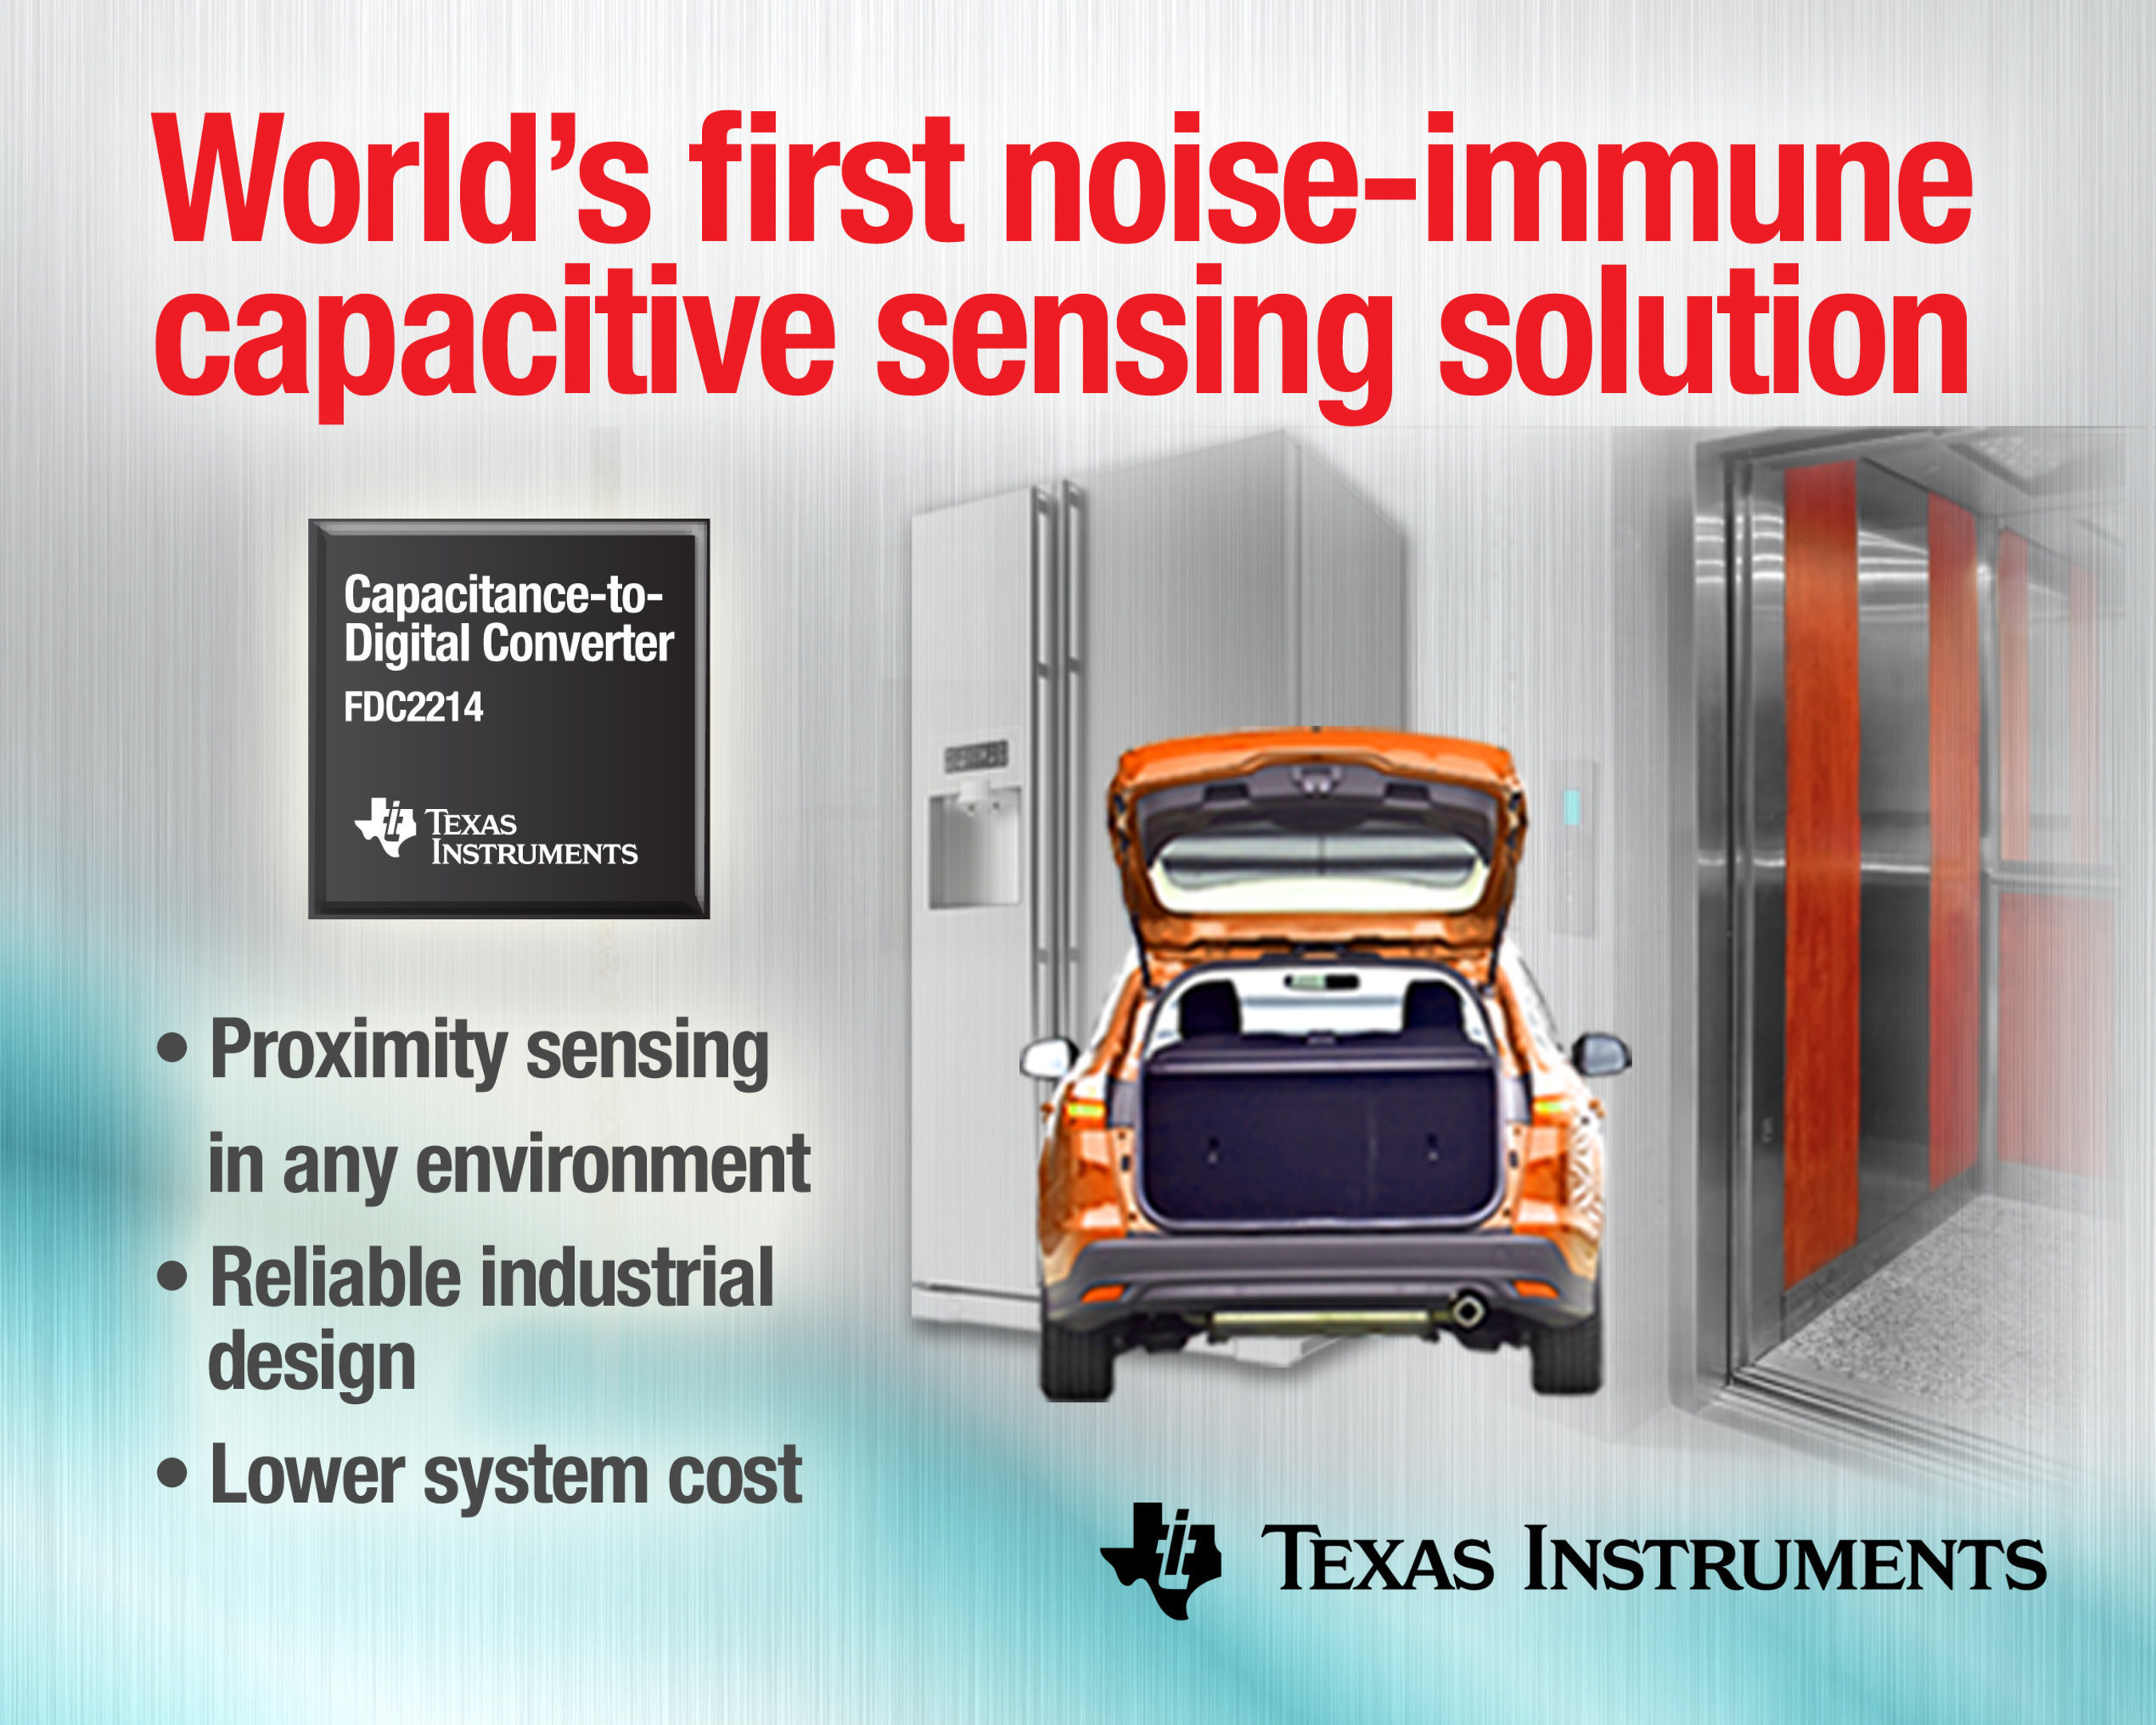 TI revolutionizes capacitive sensing with world's only noise-immune solution